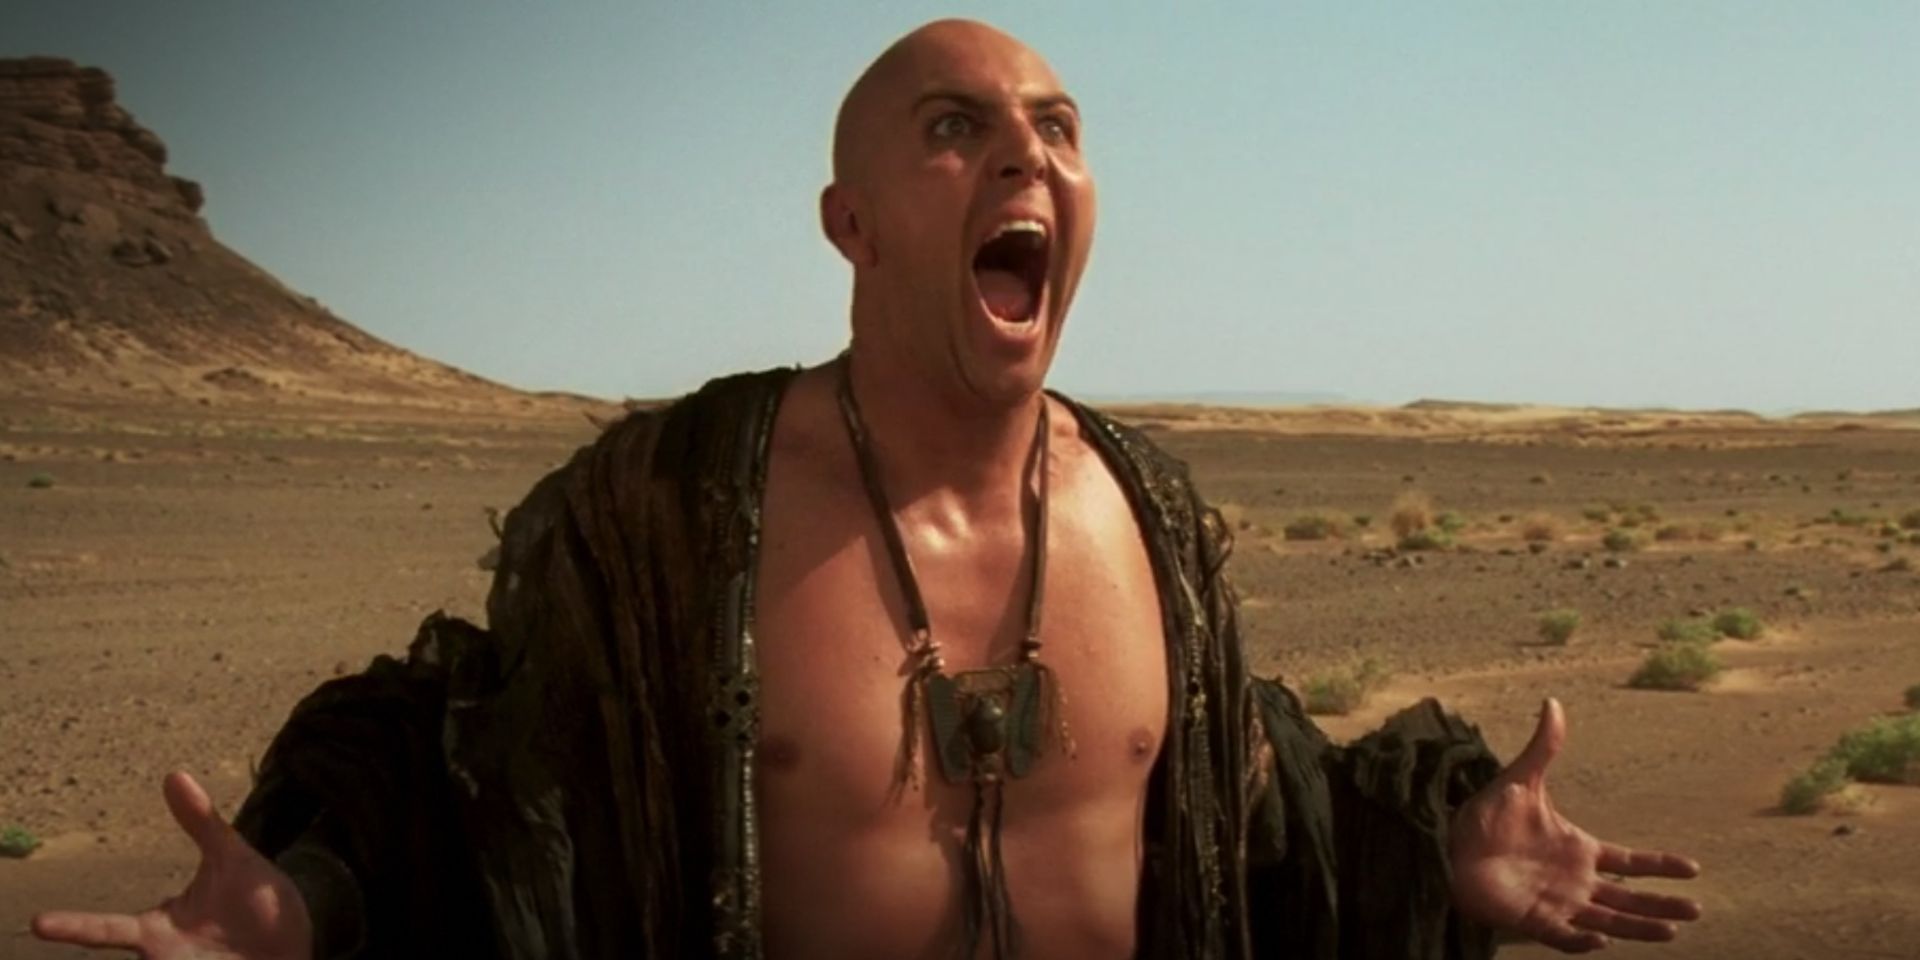 Imhotep priest in The Mummy